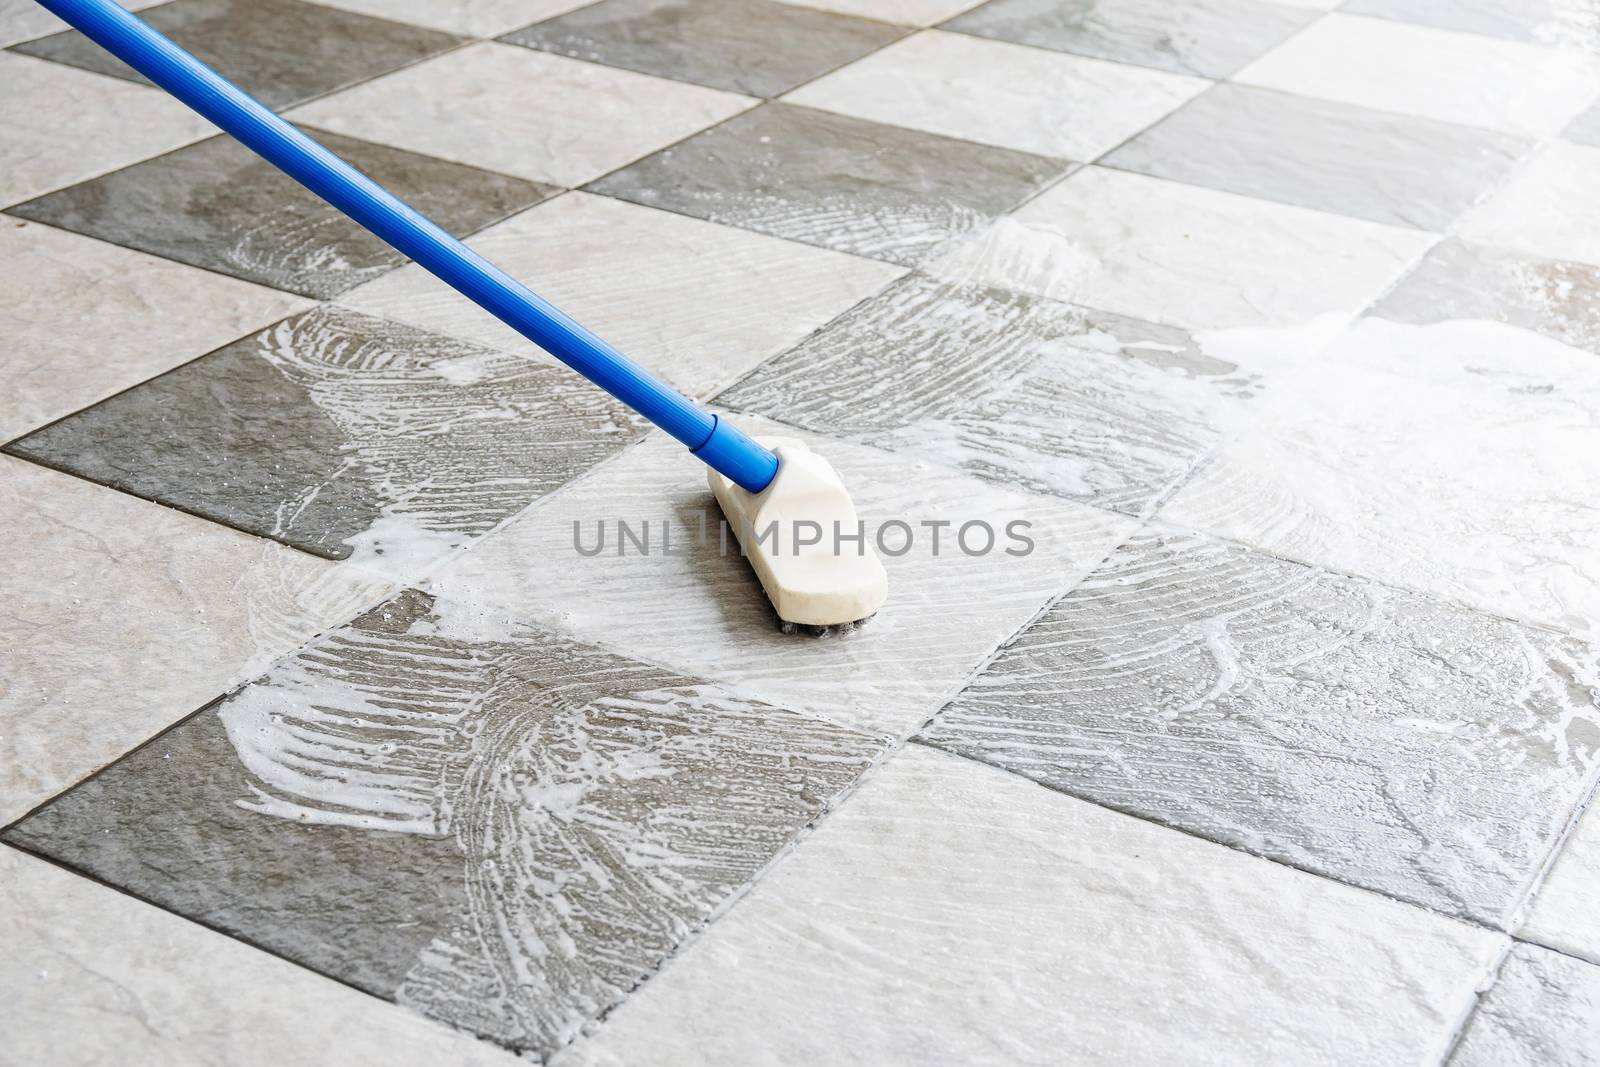 Cleaning the tile floor. by wattanaphob